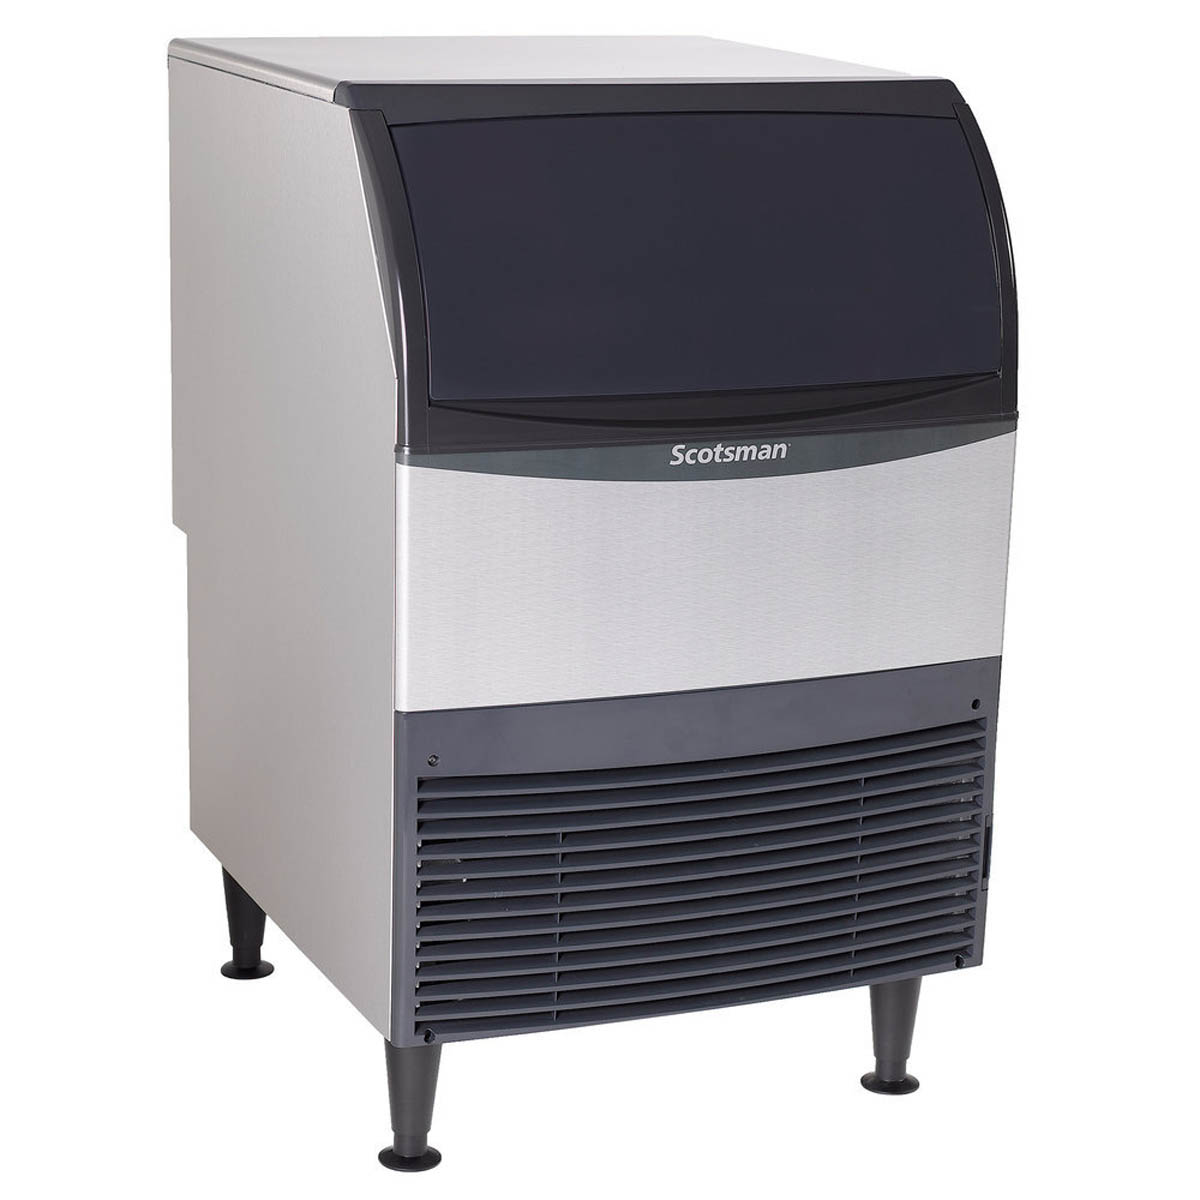 Scotsman UN324W-1 Provides Soft and Slow Melting For Your Service and Displays, Chef's Deal